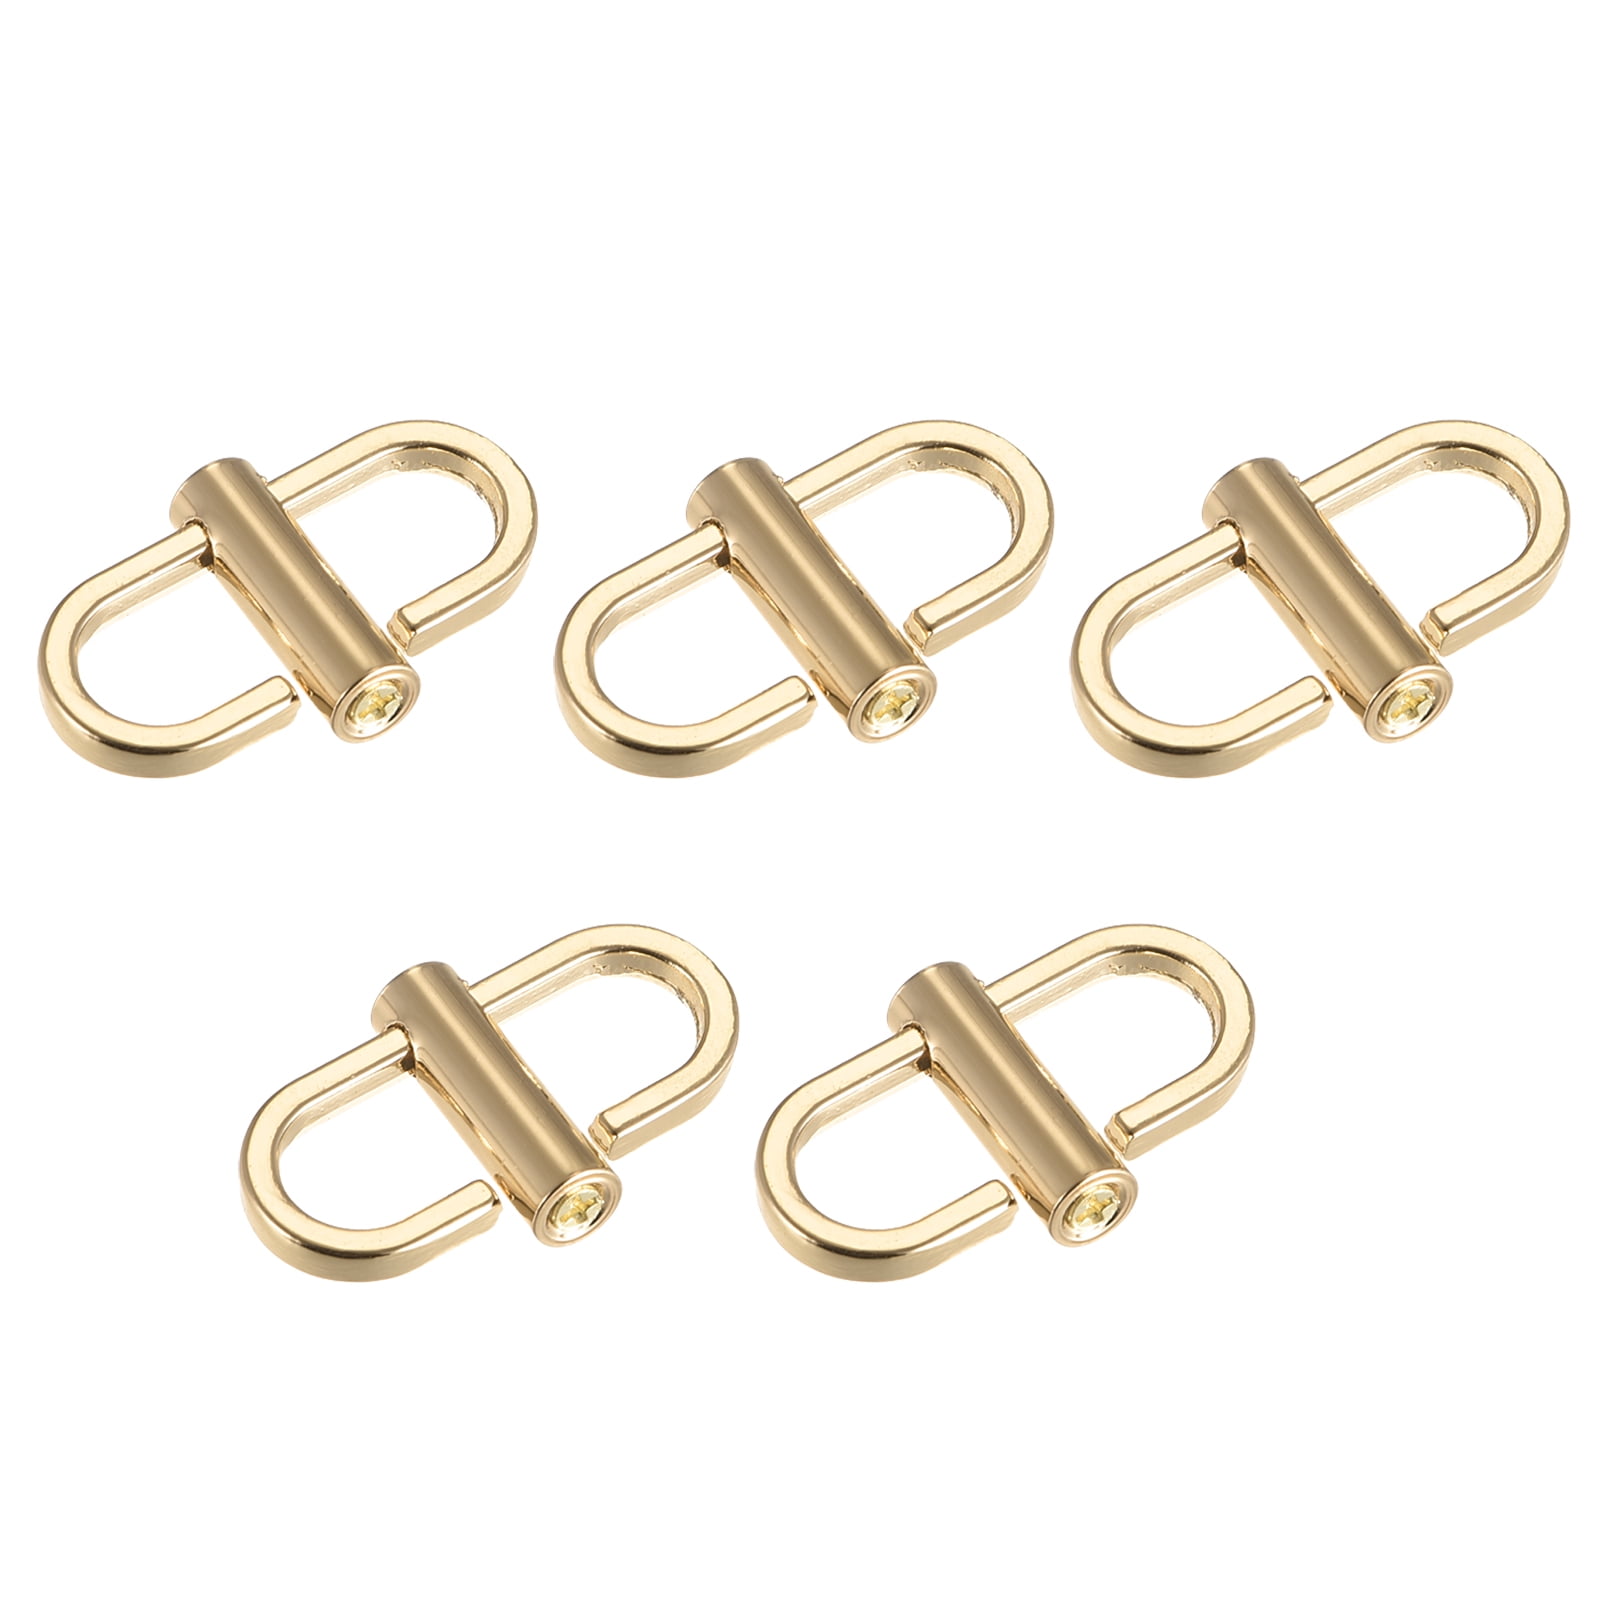 Uxcell Adjustable Metal Buckles for Chain Strap, 5Pack 23x14mm Chain  Shortener, Gold 